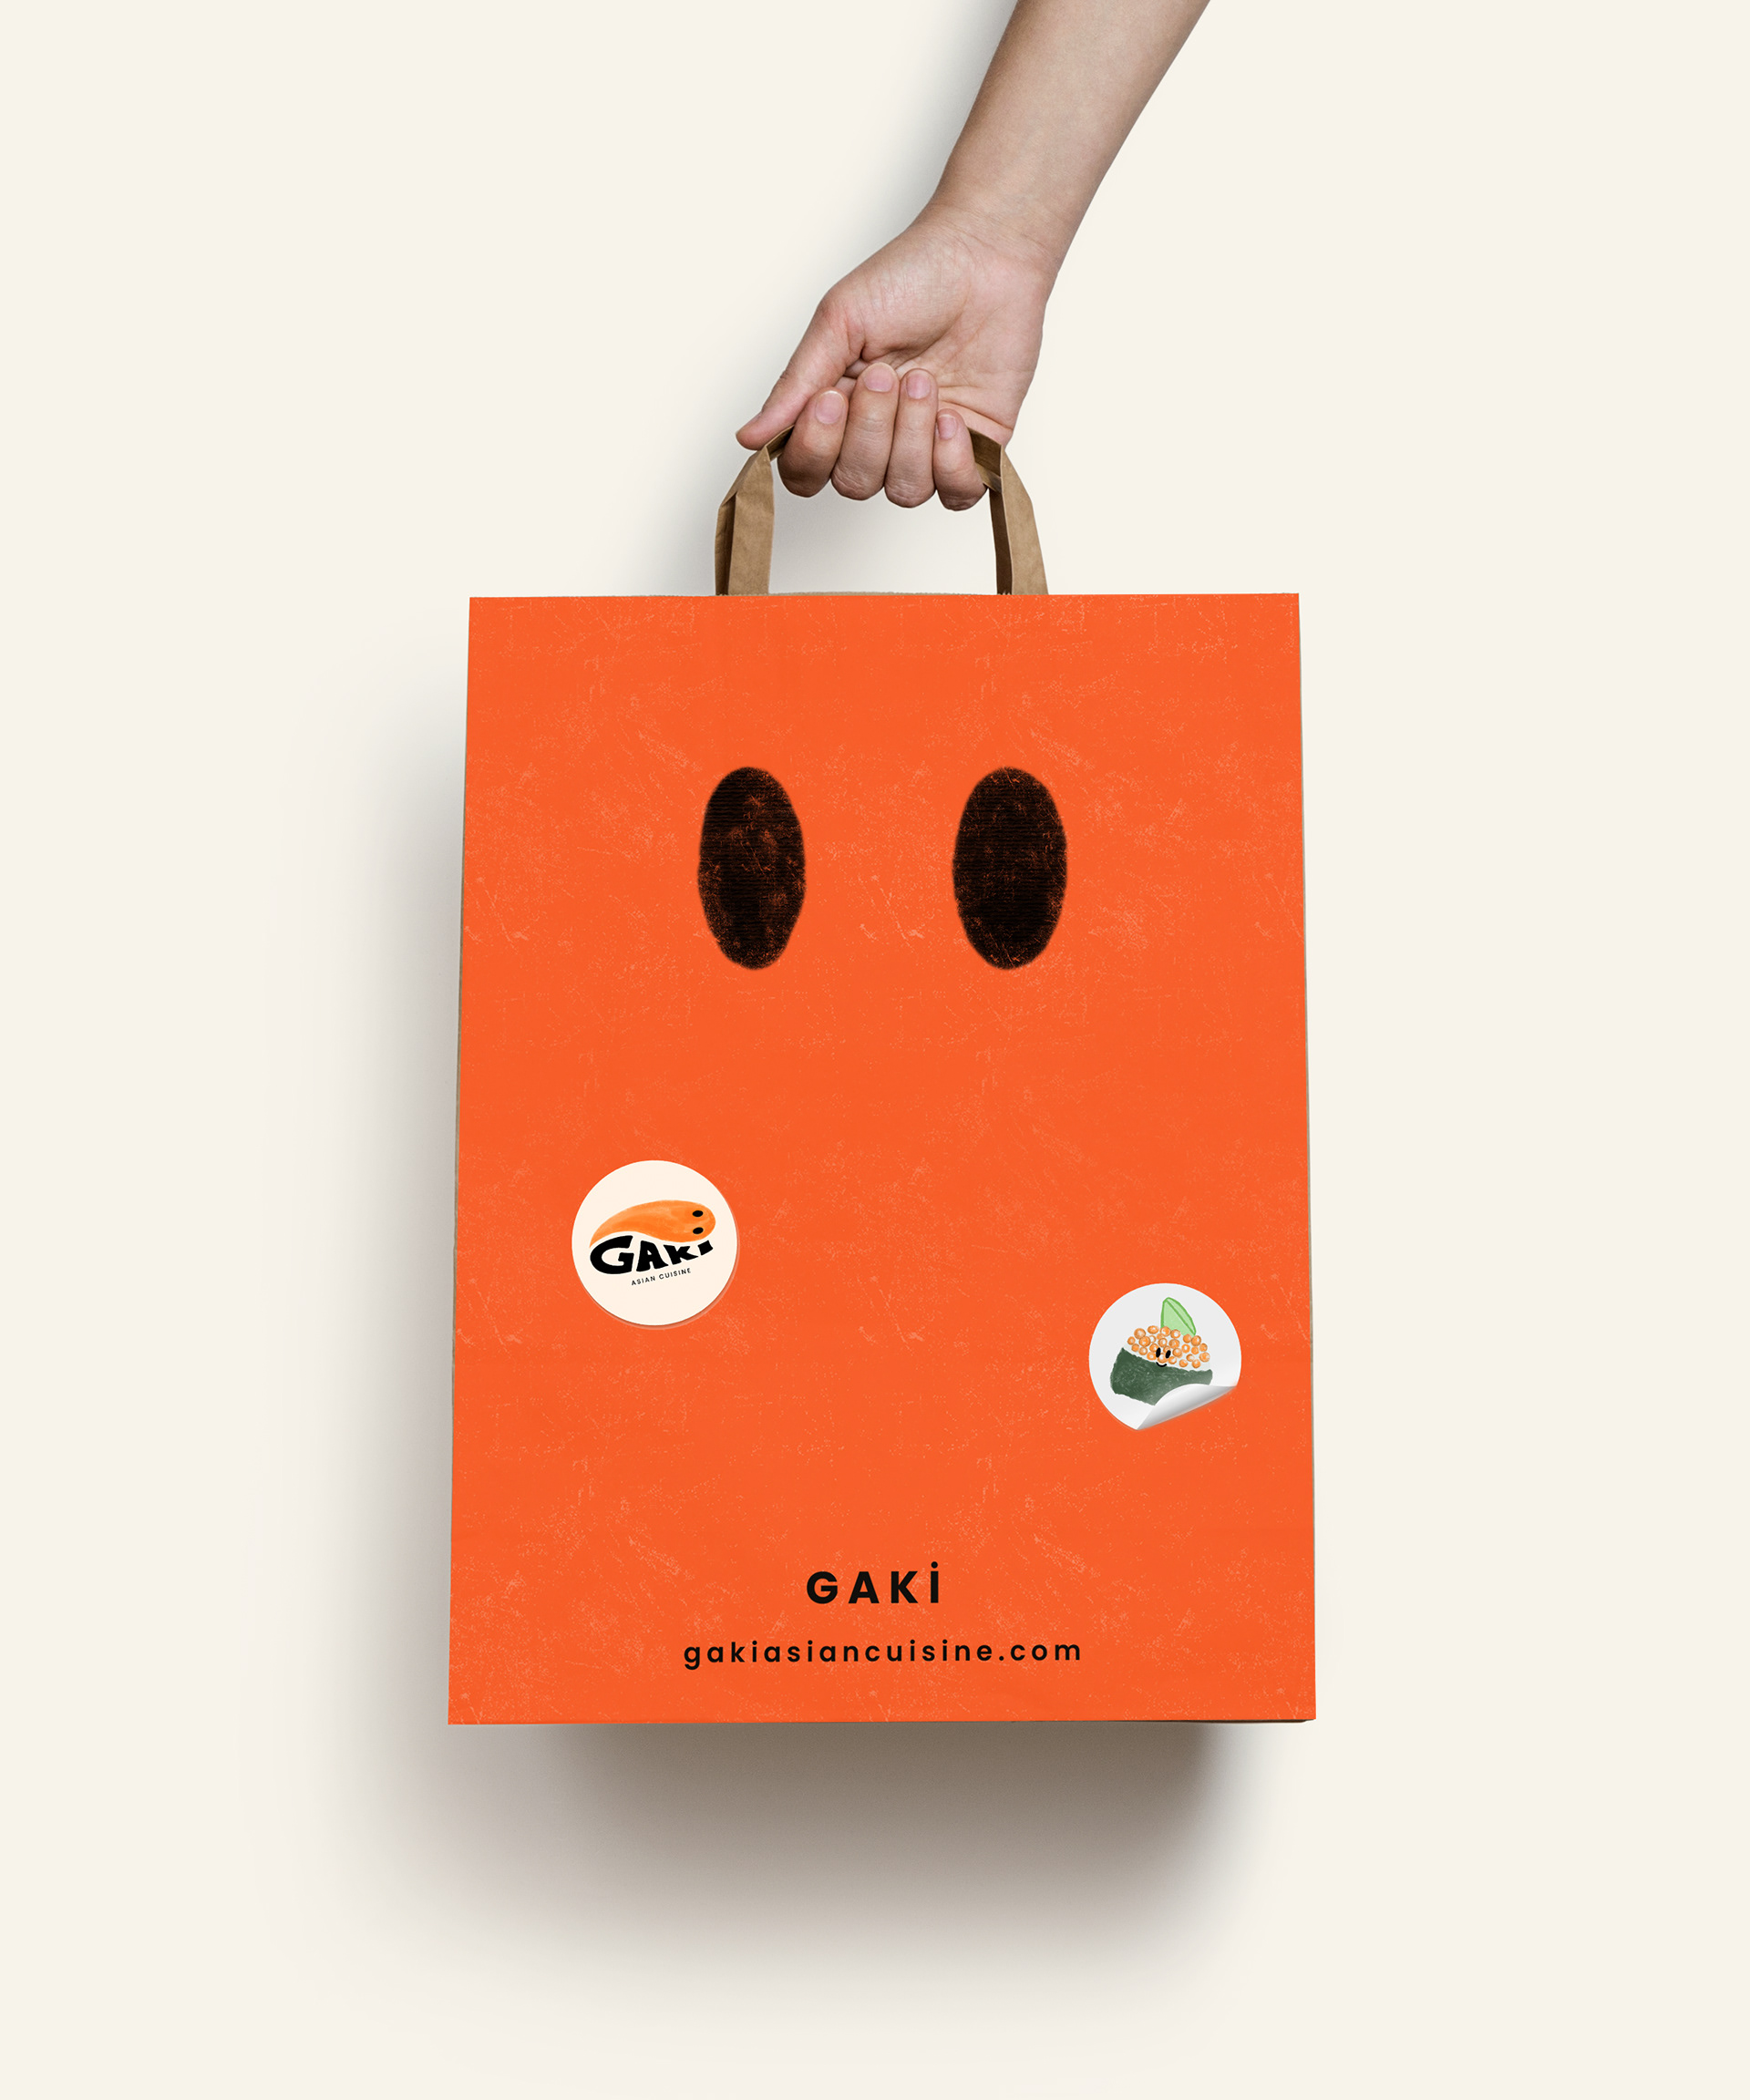 Gaki Asian Cuisine packaging designed by a group of two